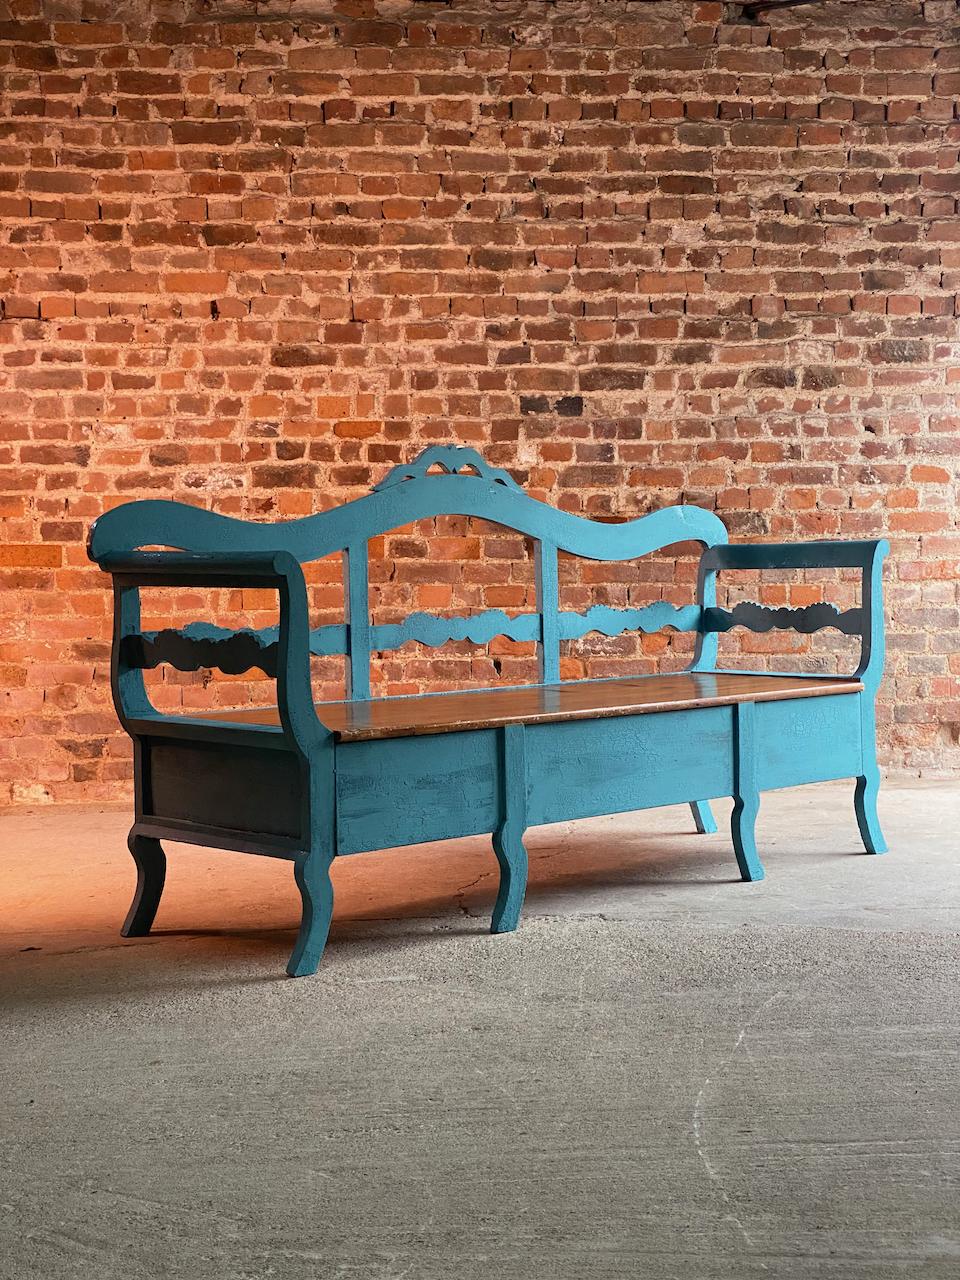 Magnificent Swedish Gustavian settle bench Sweden Circa 1890

Super fabulous 19th century Swedish ‘Gustavian’ pine bench settle dating to circa 1890, originating from the North of Sweden, this beautiful settle features a high back with carved